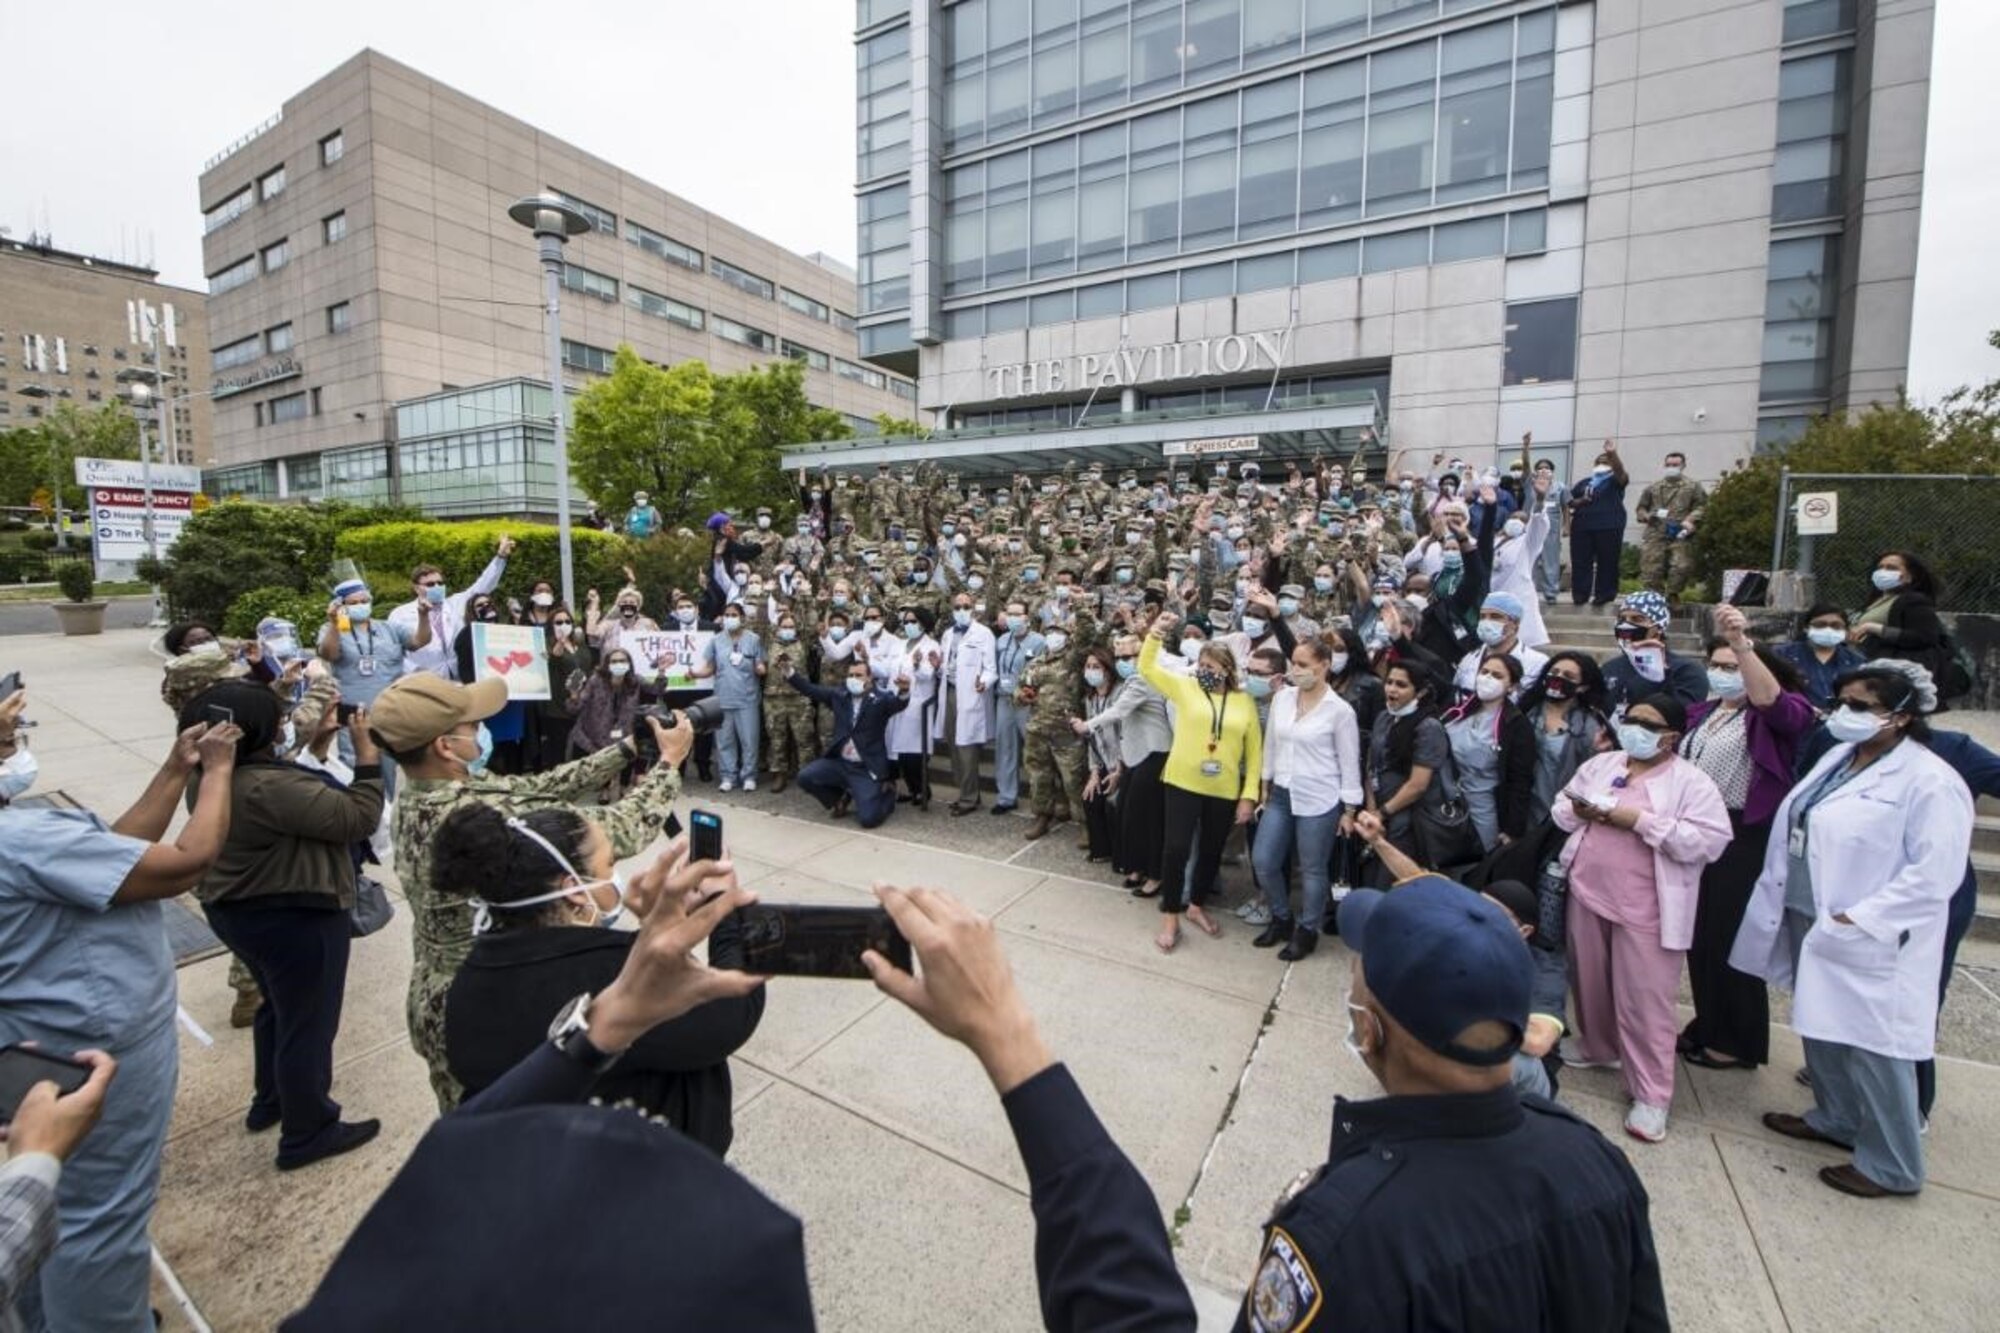 433rd Medical Group Reserve Citizen Airmen, along with other personnel deployed to help in New York hospitals, were given a celebratory send off, May 22, 2020 at the Queens Hospital Center, in New York City.